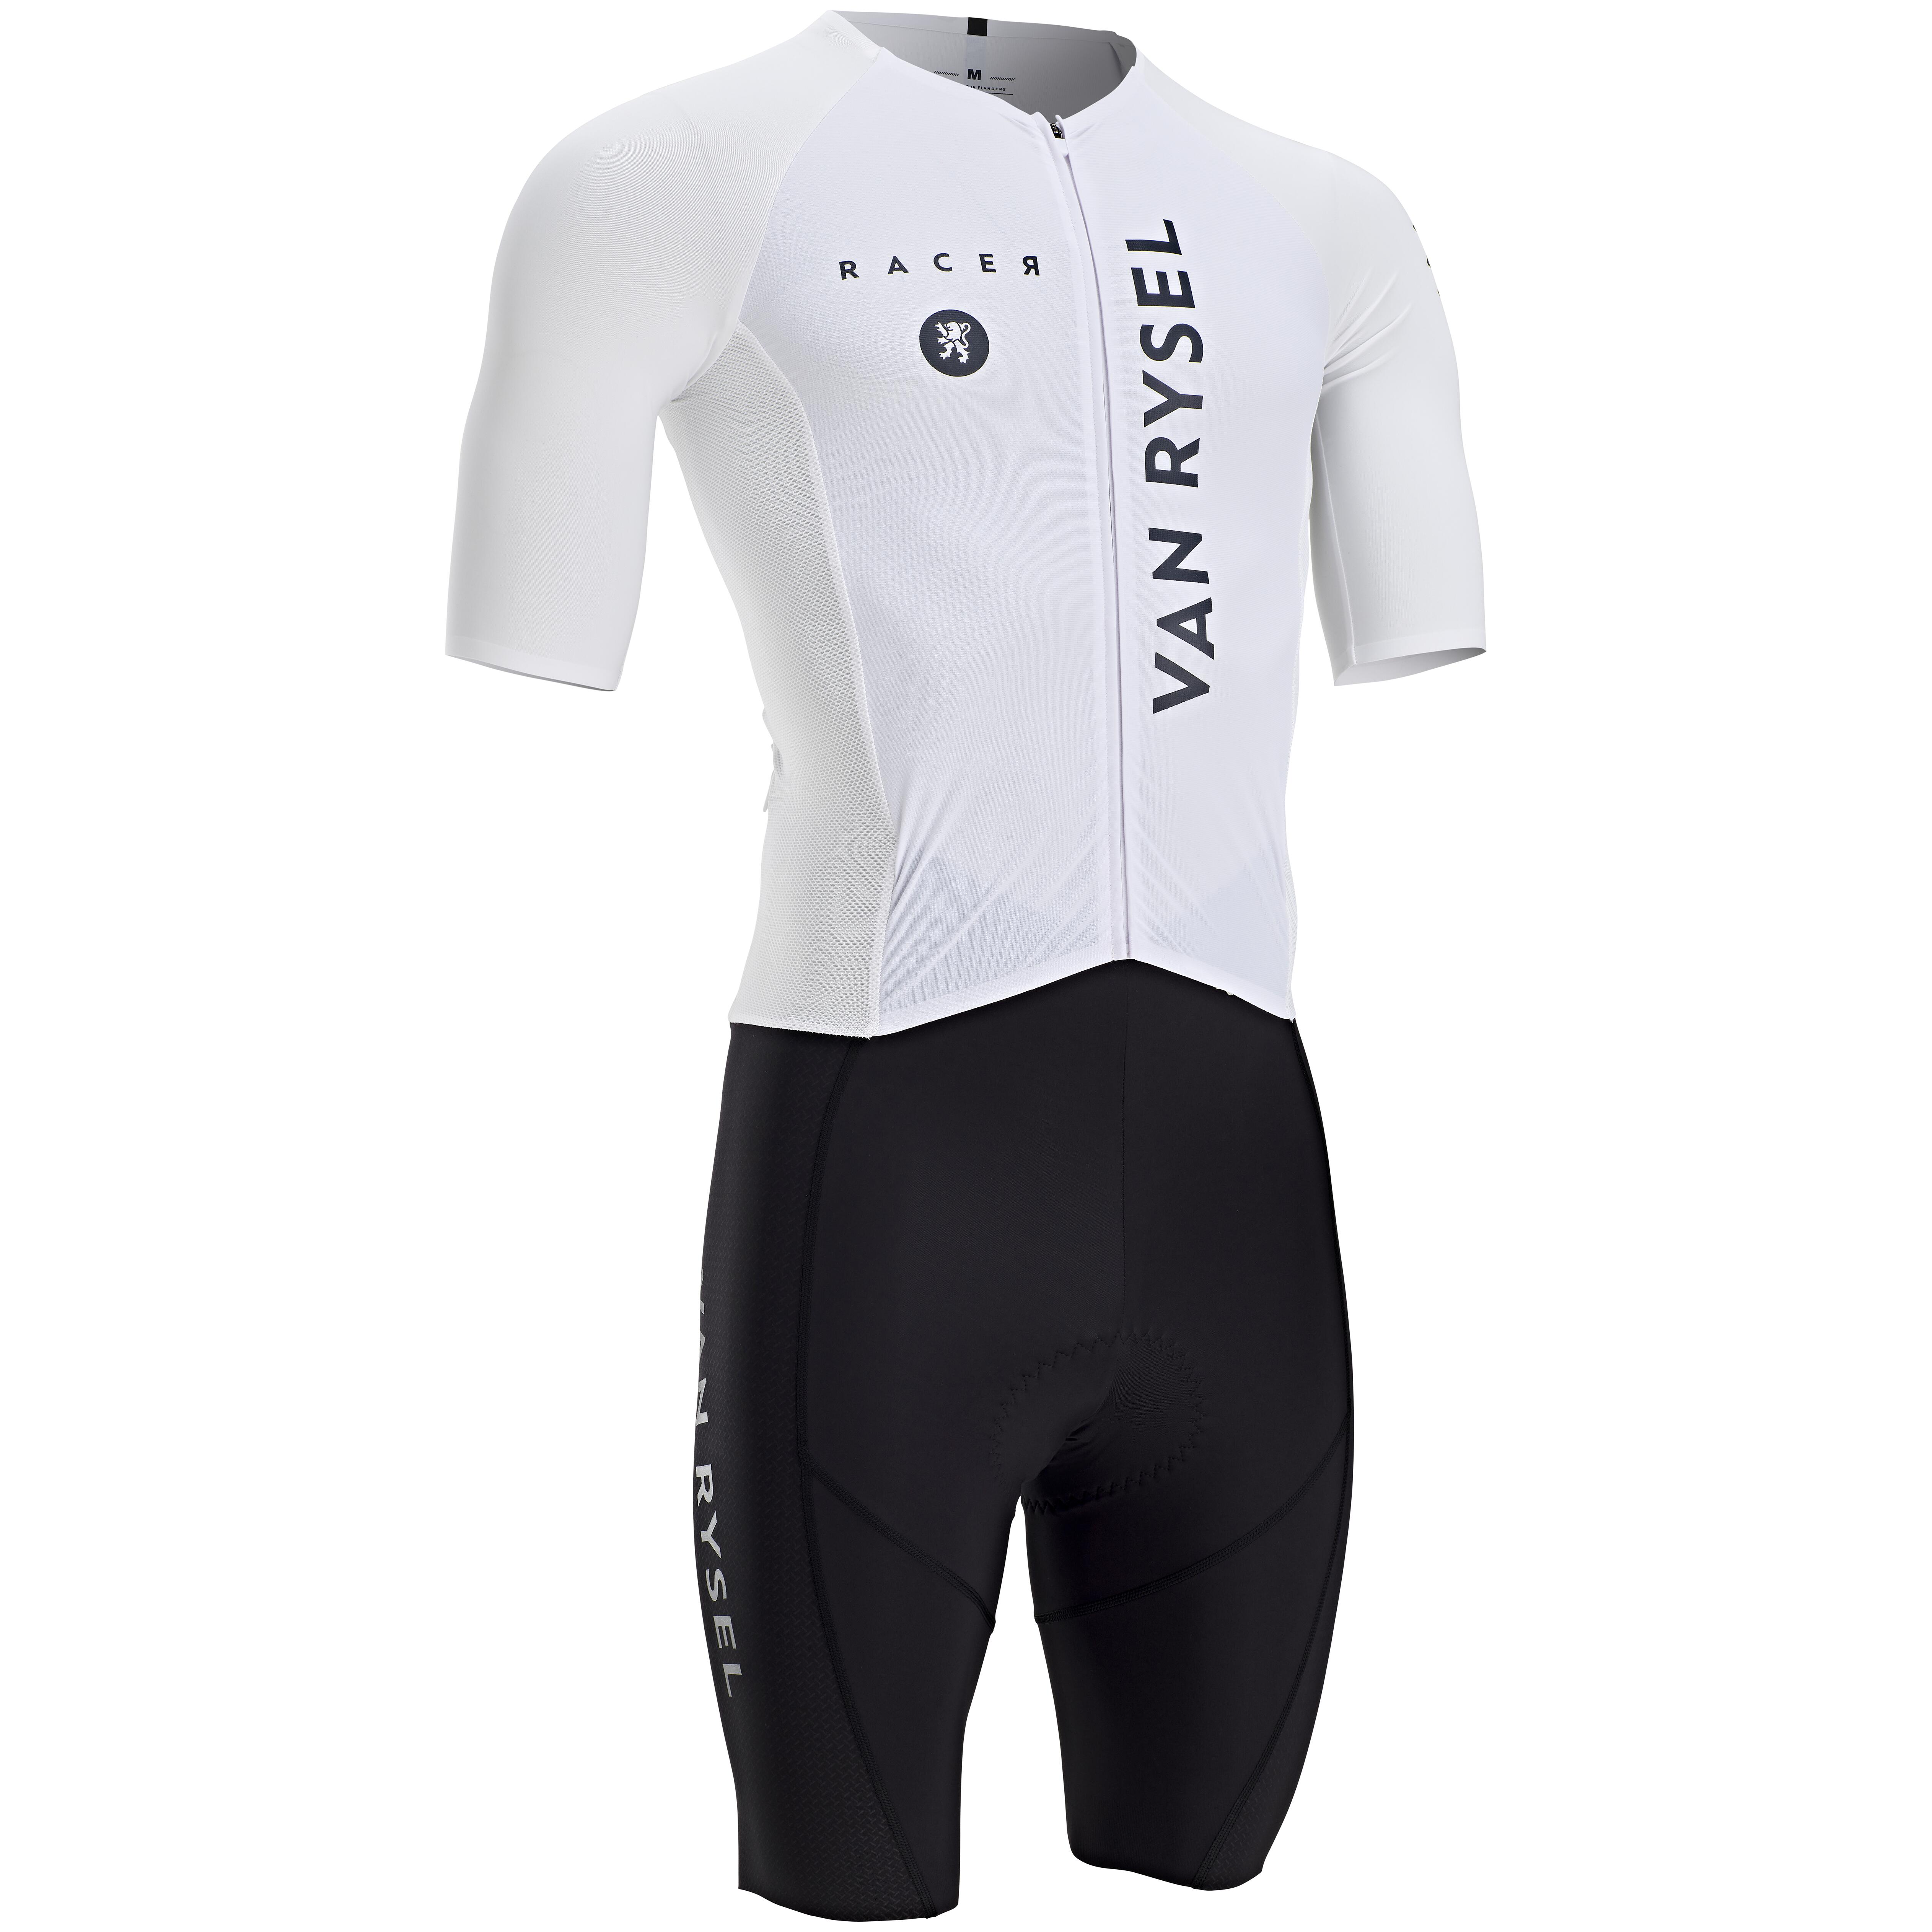 Road Cycling Aerosuit - Racer Team White